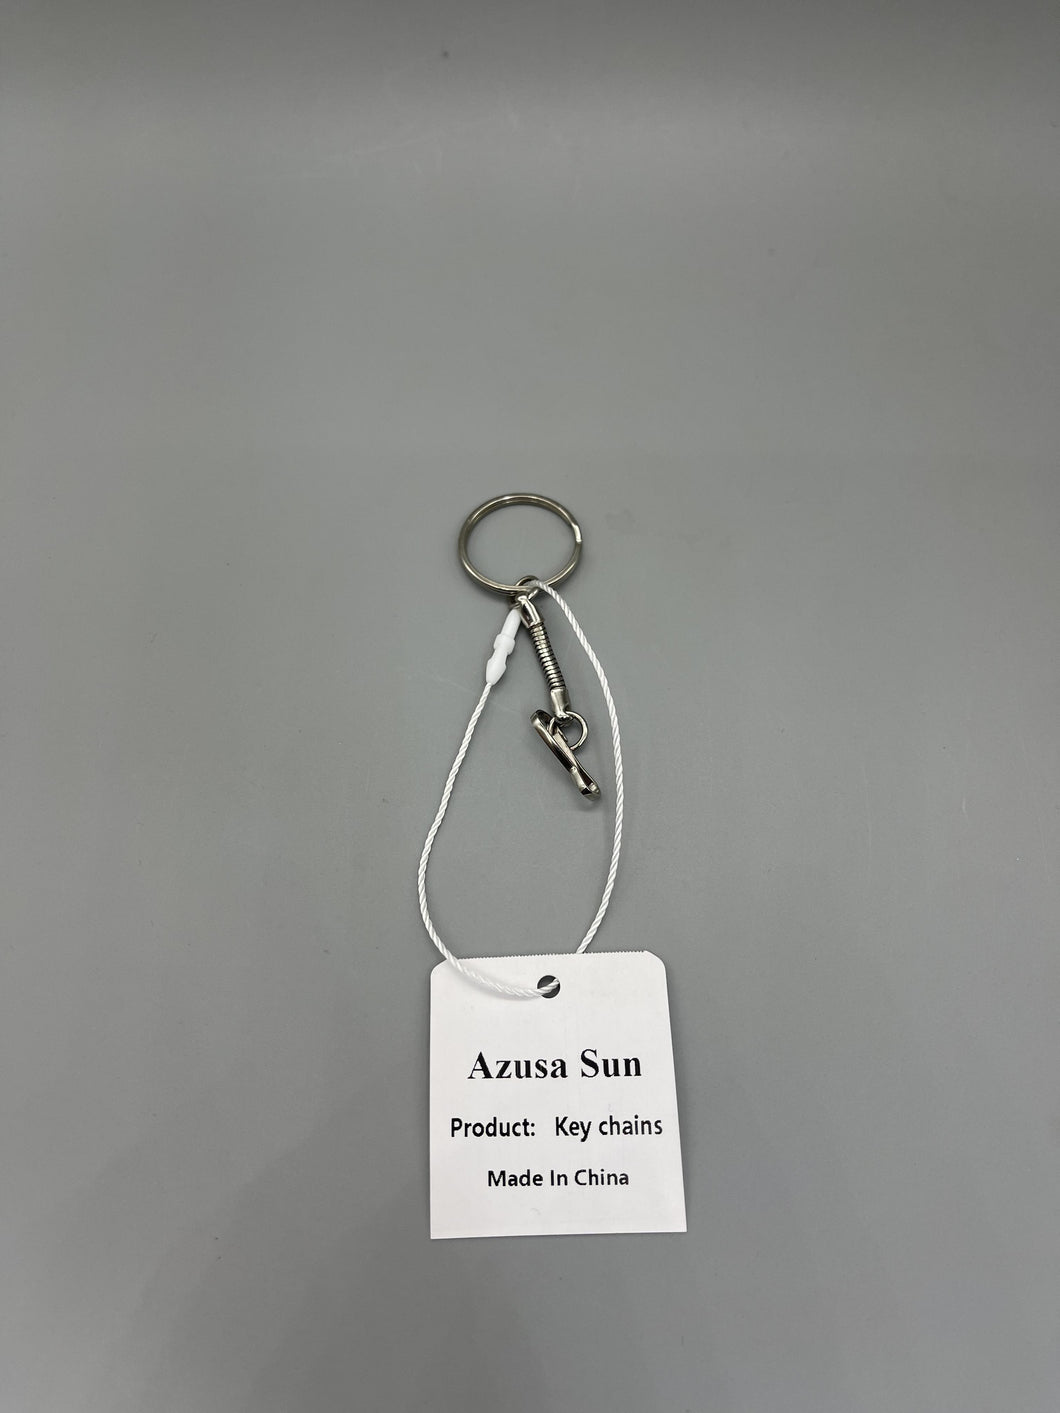 Azusa Sun Key chains ,Keyrings of common metal,50PCS Split Key Ring with Chain and Jump Rings,Split Key Ring with Chain Silver Color Metal Split Key Chain Ring Parts with Open Jump Ring and Connector